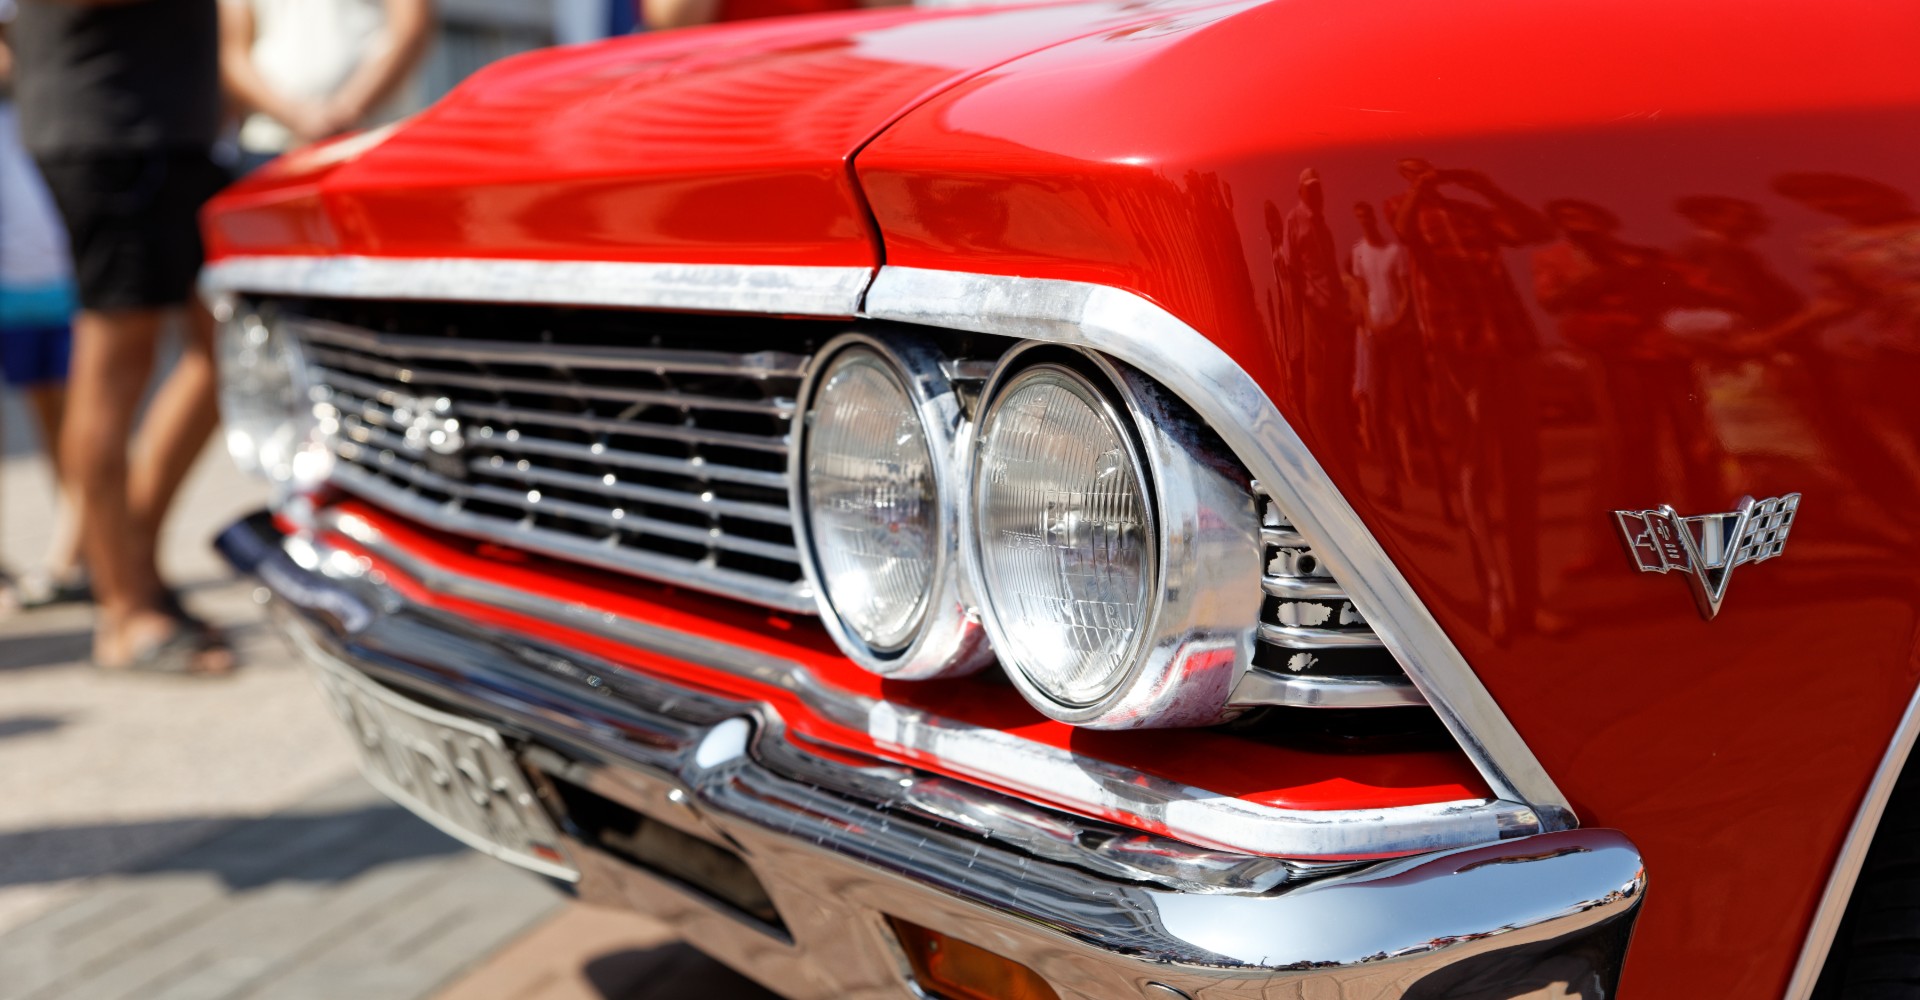 Why Should You Go to a Classic Auto Body Shop for Restoration?